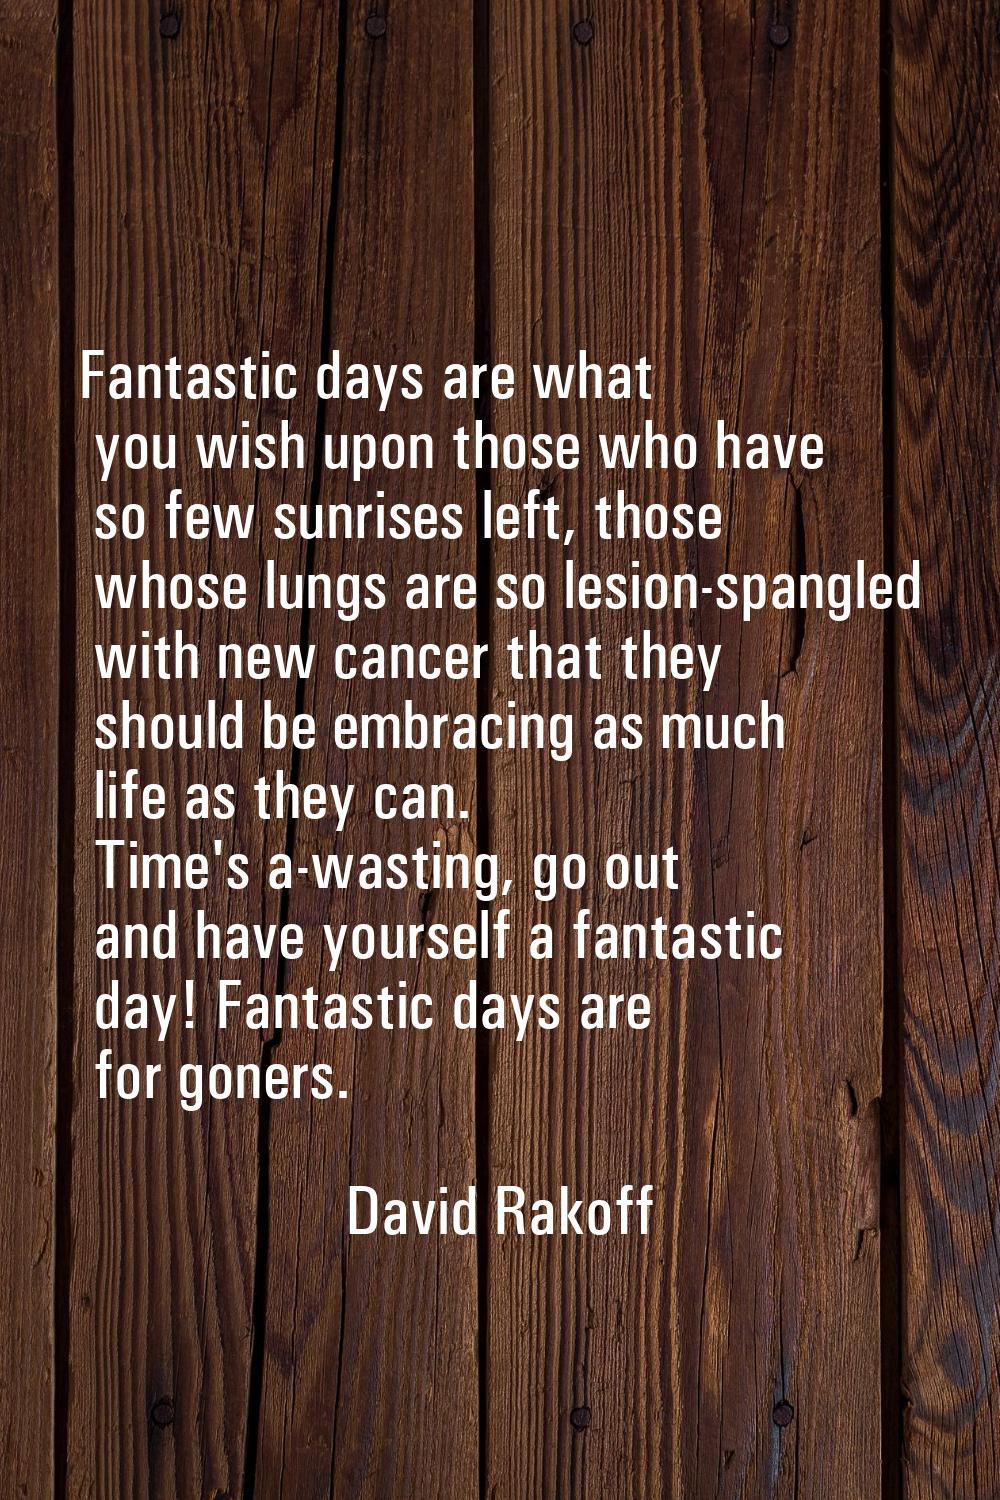 Fantastic days are what you wish upon those who have so few sunrises left, those whose lungs are so